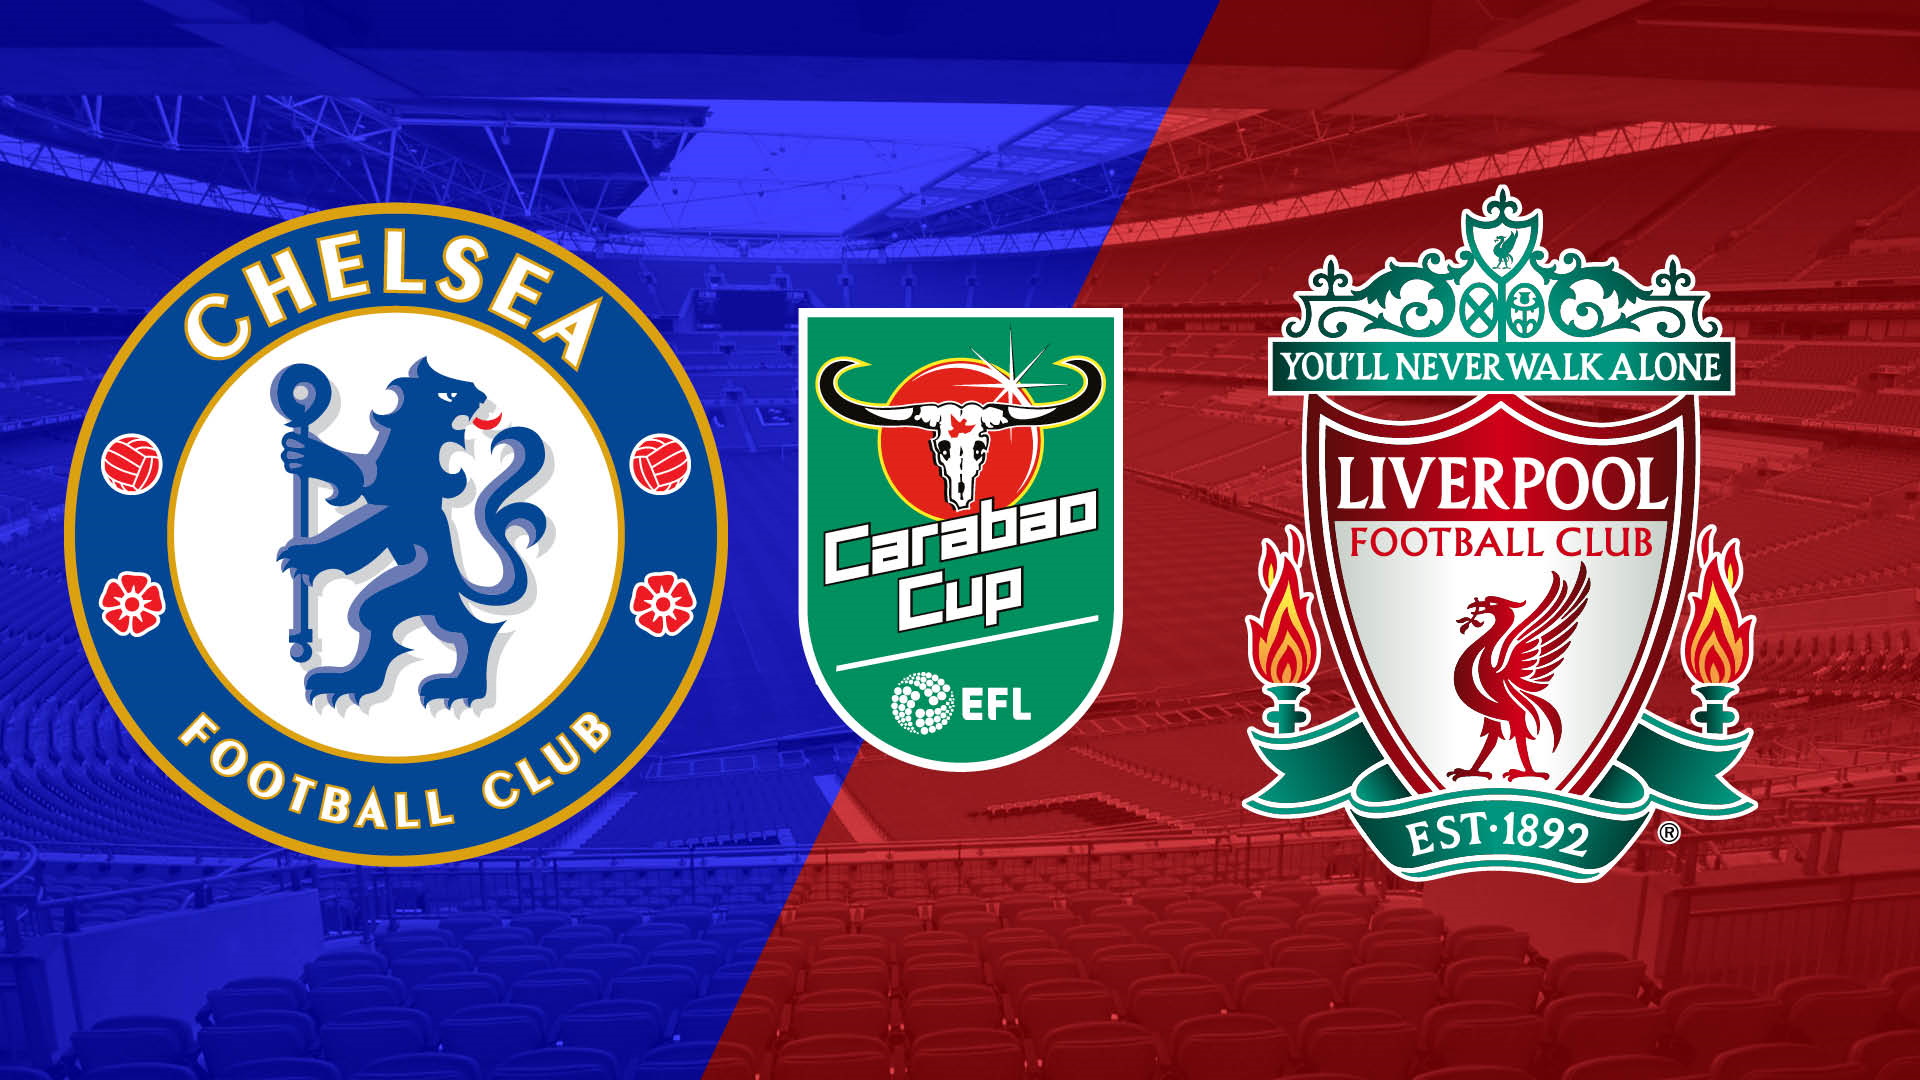 Chelsea Vs Liverpool Live Stream And How To Watch The Carabao Cup Final Online And On TV, Team News. What Hi Fi?